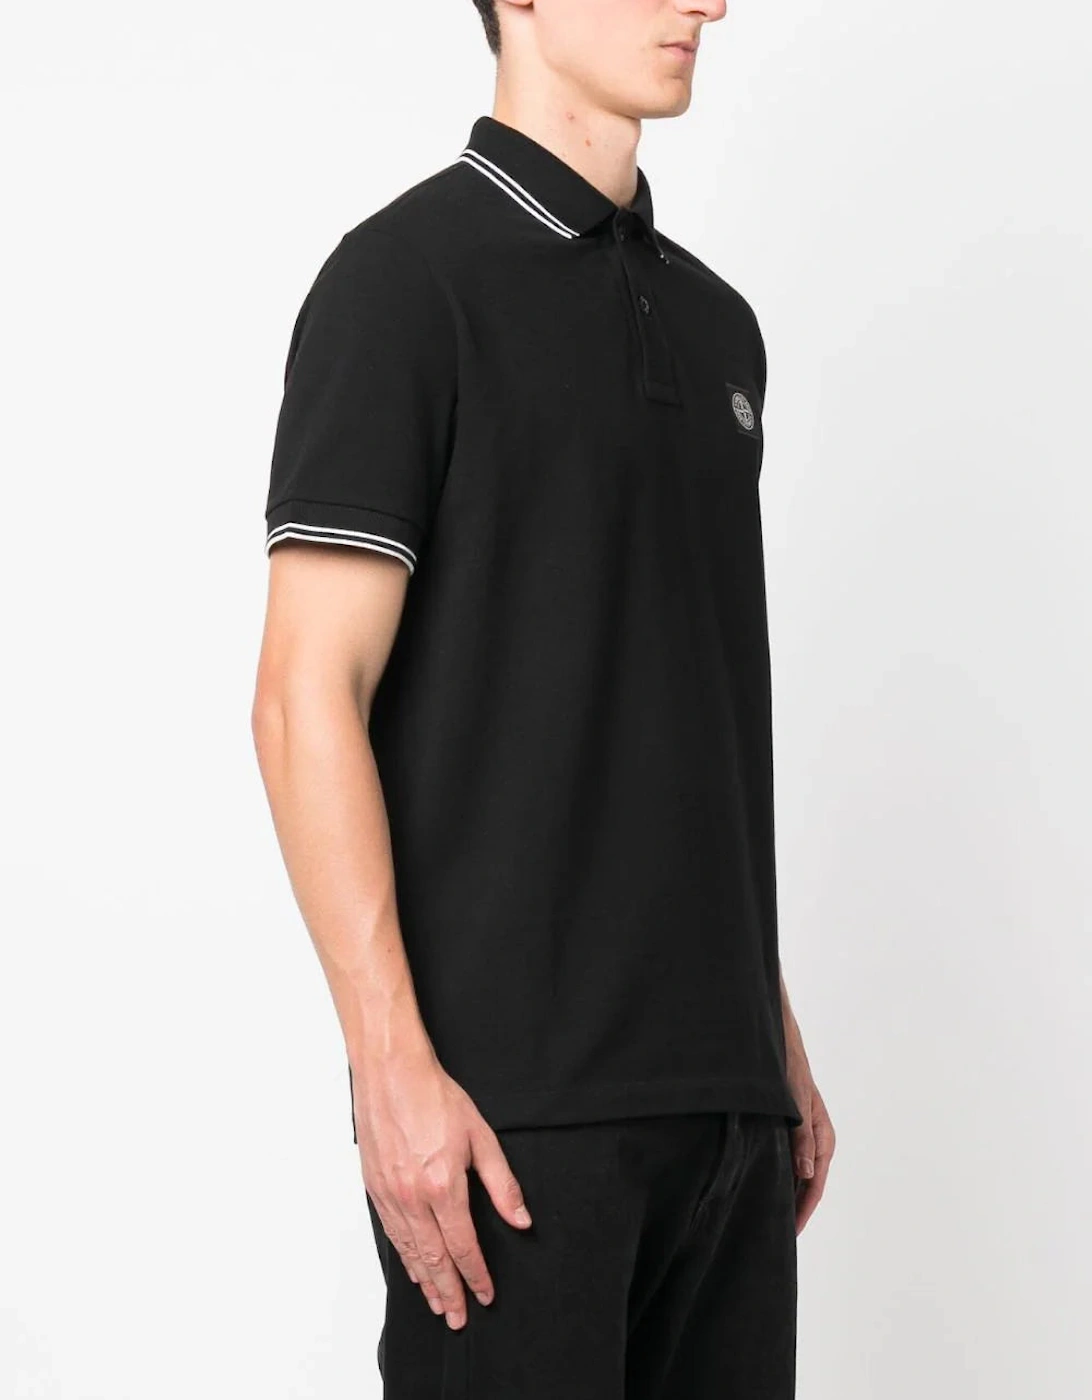 Compass Patch Logo Polo in Black